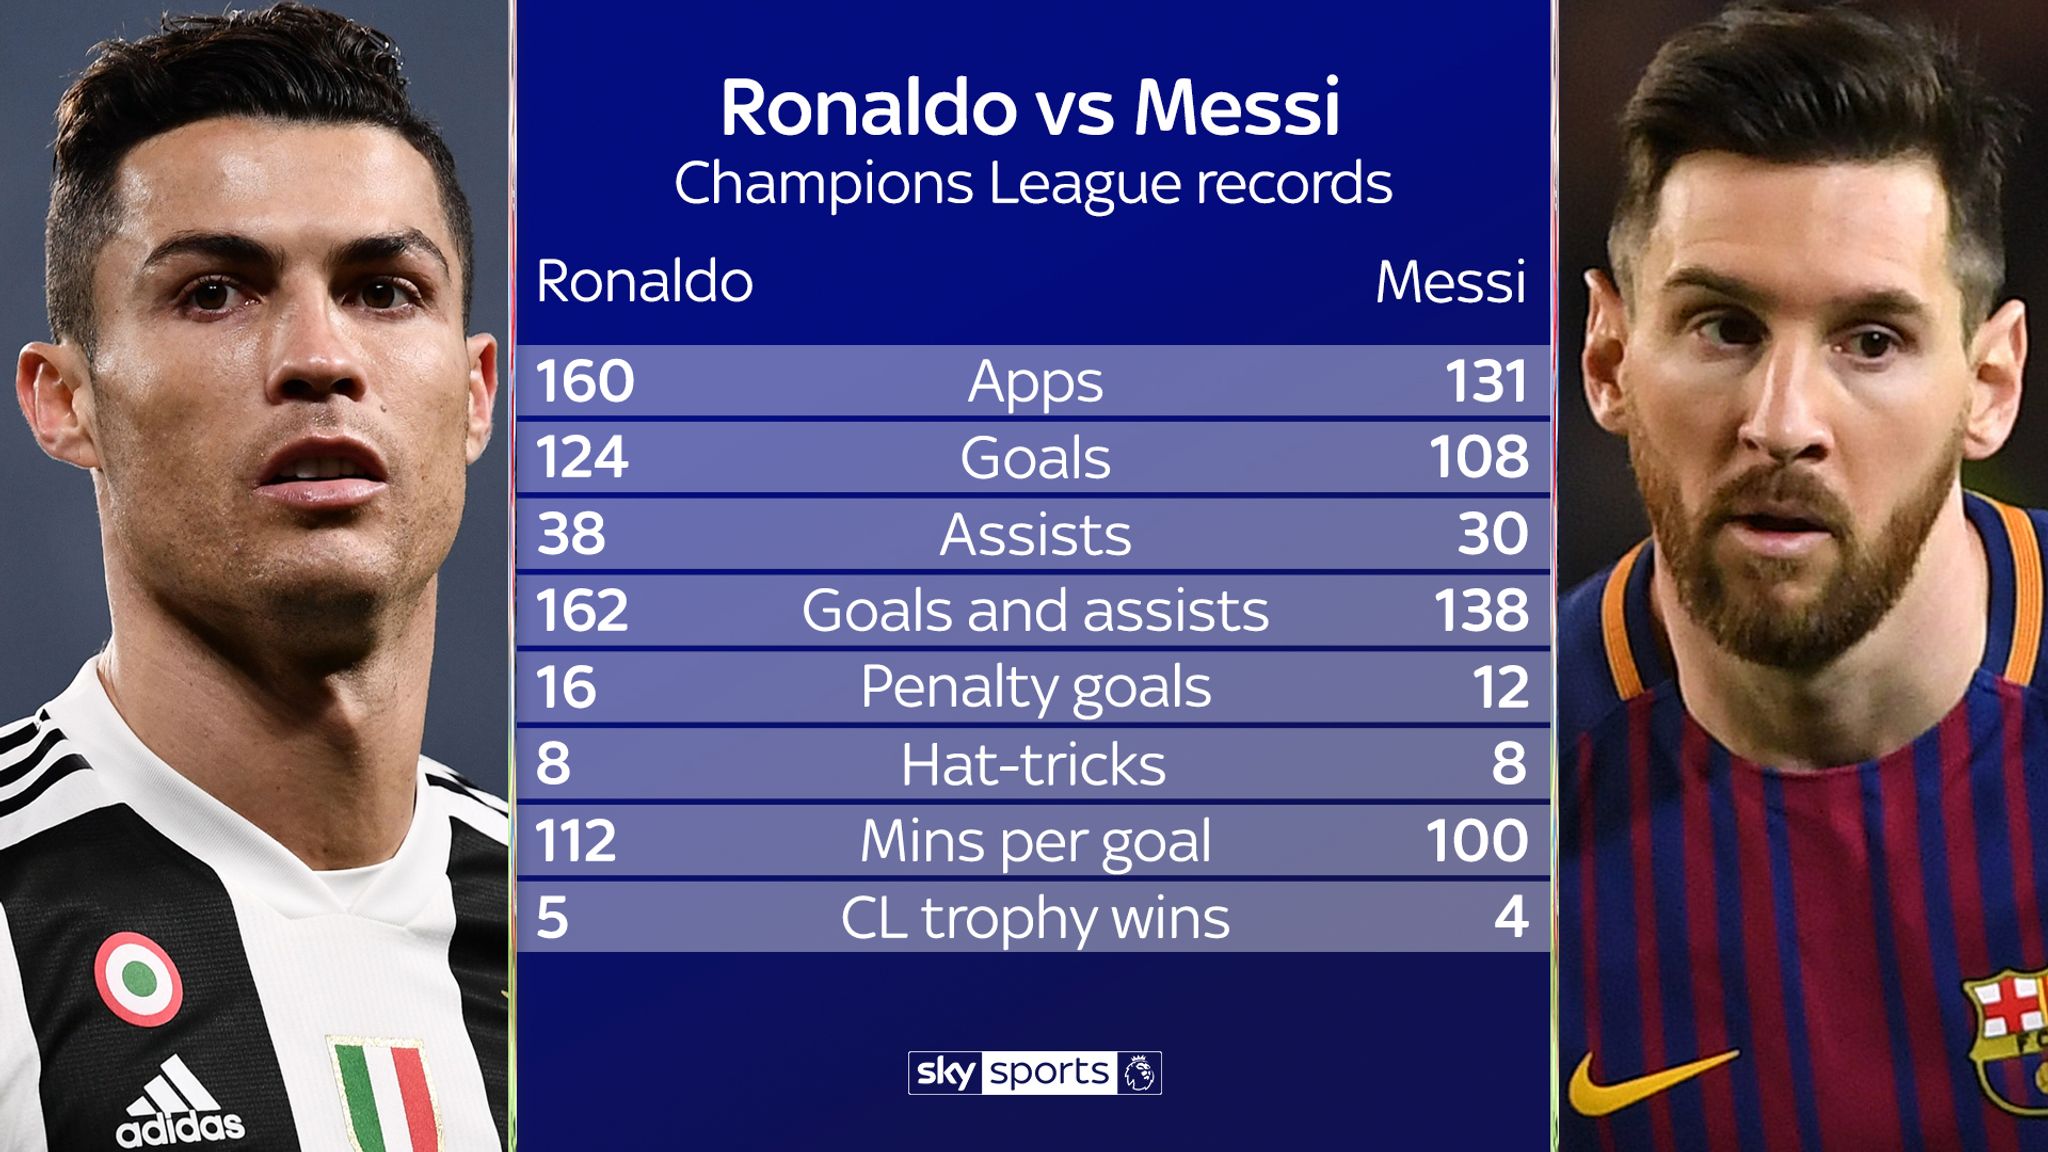 Lionel Messi shines but Cristiano Ronaldo is Champions League king